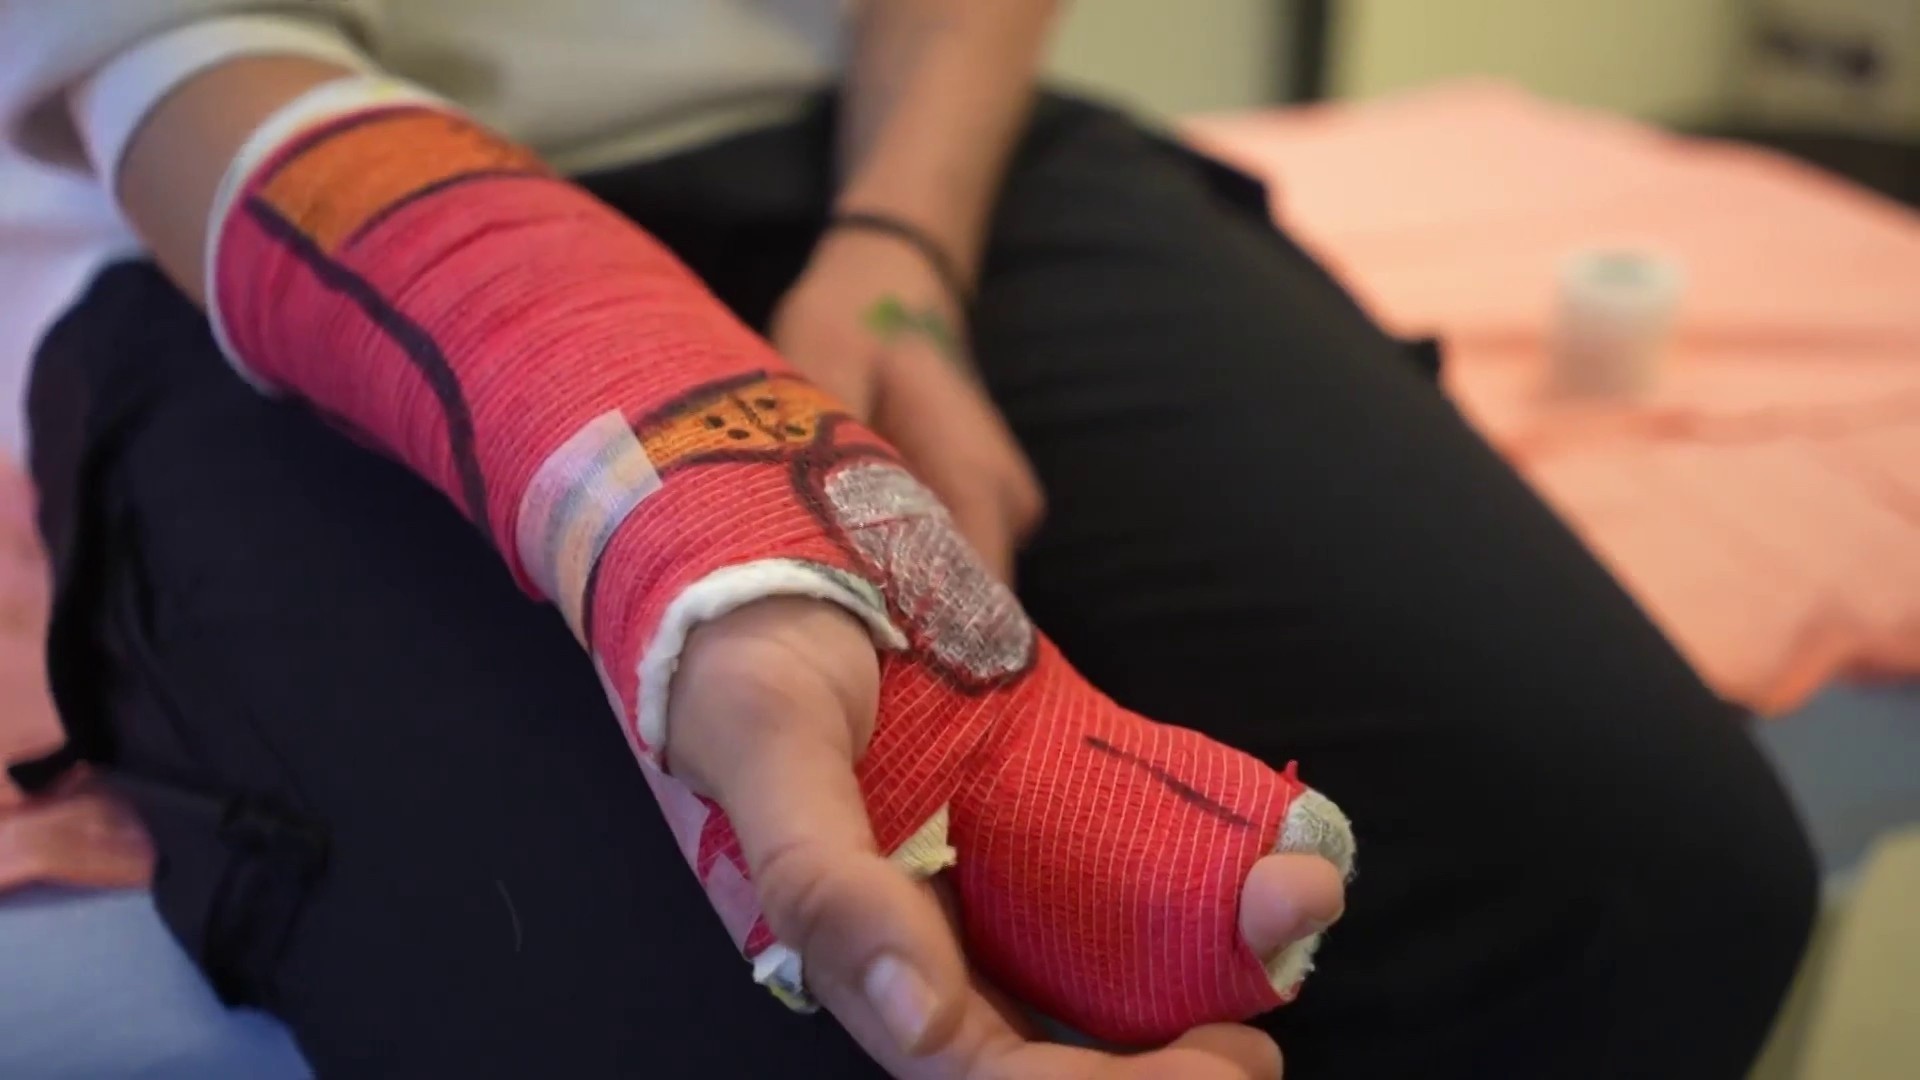 This medical worker puts smiles on young patients faces with cast art